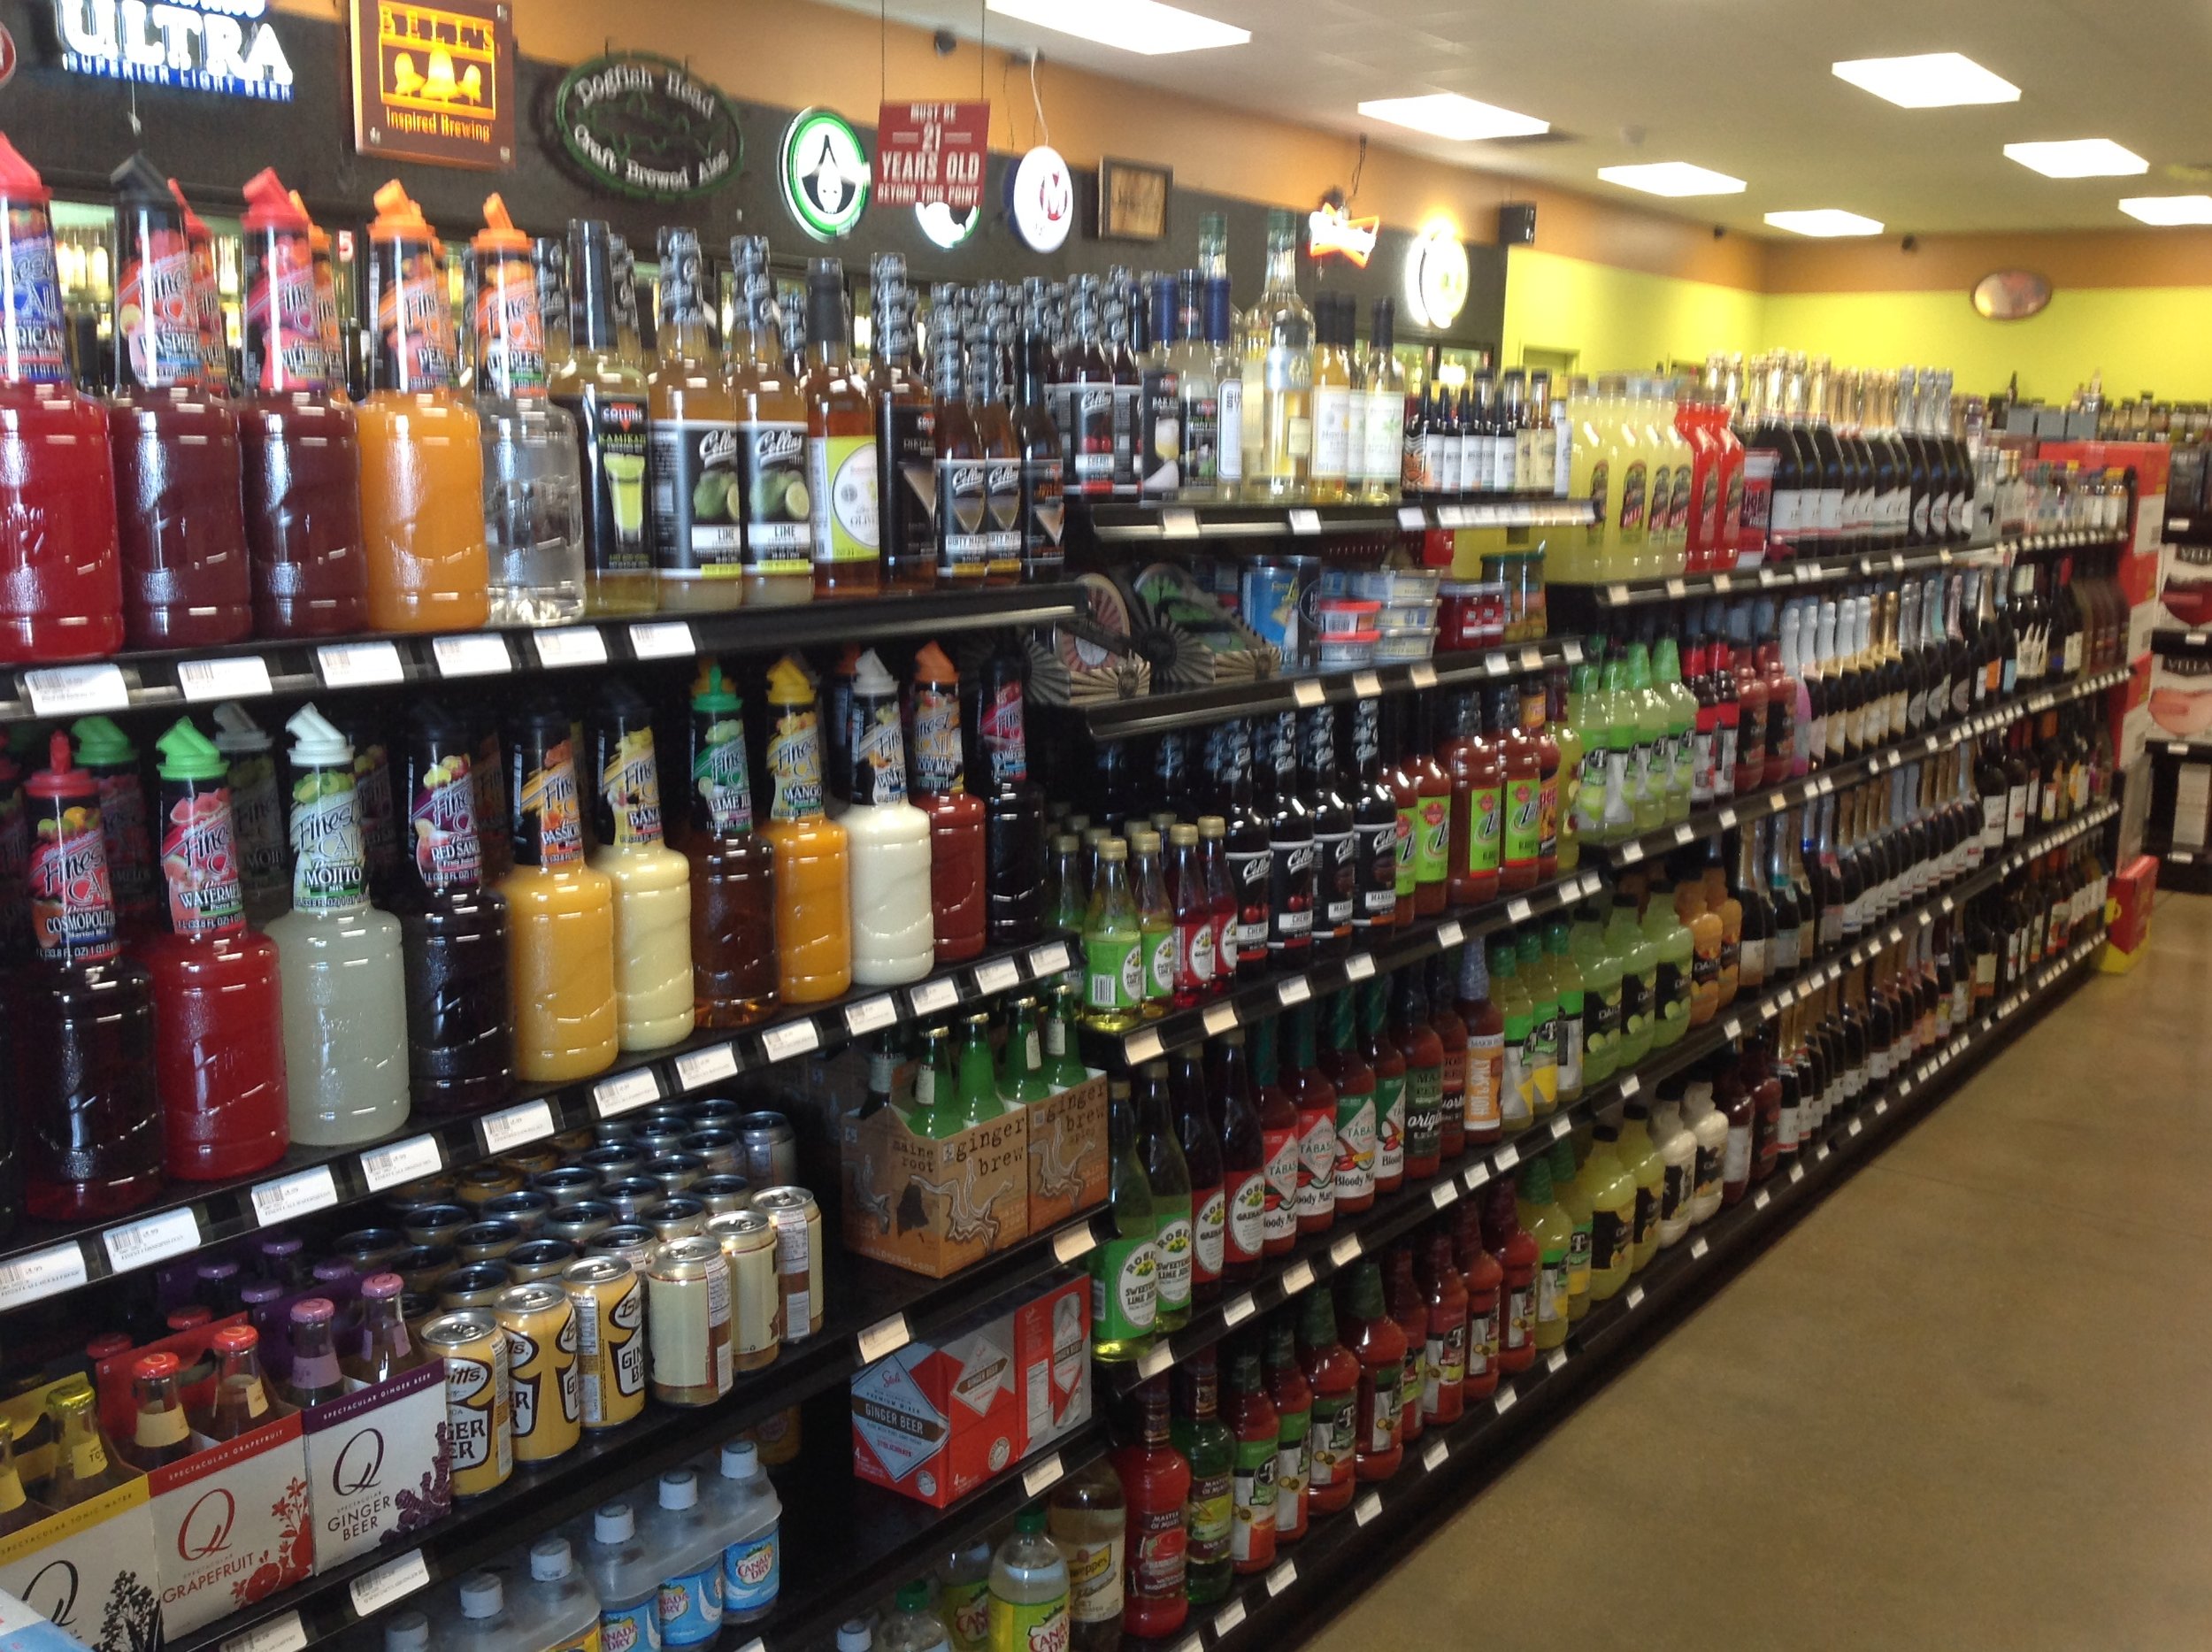  We have all the mixers, bitters and syrups you need to make the perfect drink! Feel free to ask the staff for suggestions! 